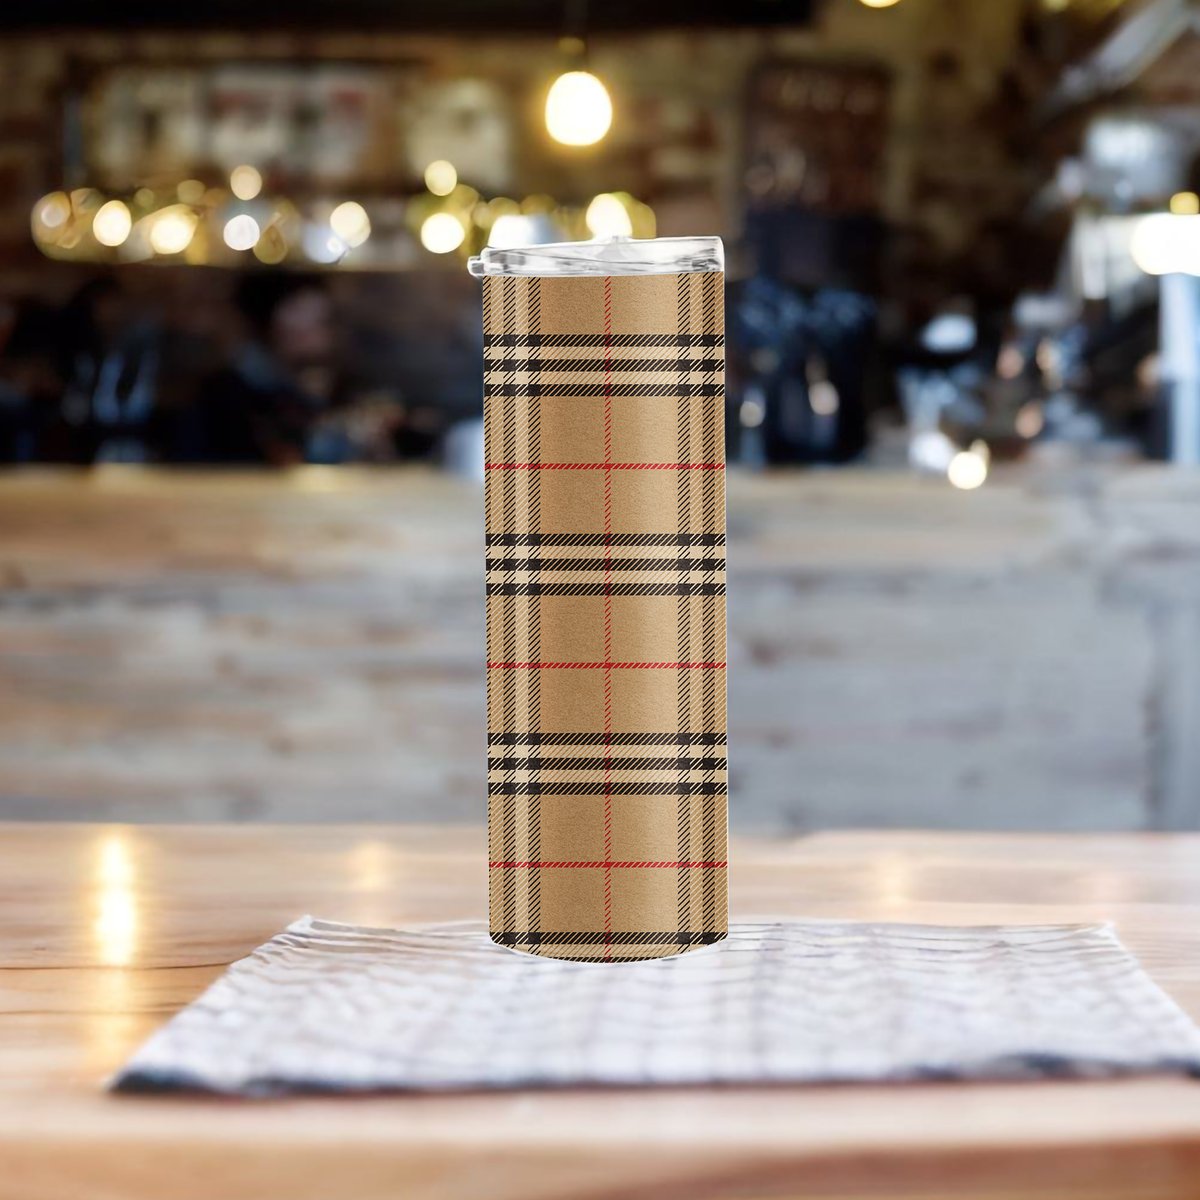 Get creative and personalize your unique gifts with this eye-catching plaid design!
etsy.me/4ci4mfq
#PlaidTumbler #DrinkwareDecor #SublimationDesign #CustomGifts #VintageHoliday #InstantDownload #DIYGifts #TumblerWrap #CustomizableDesigns #giftforher #etsyfinds #pattern